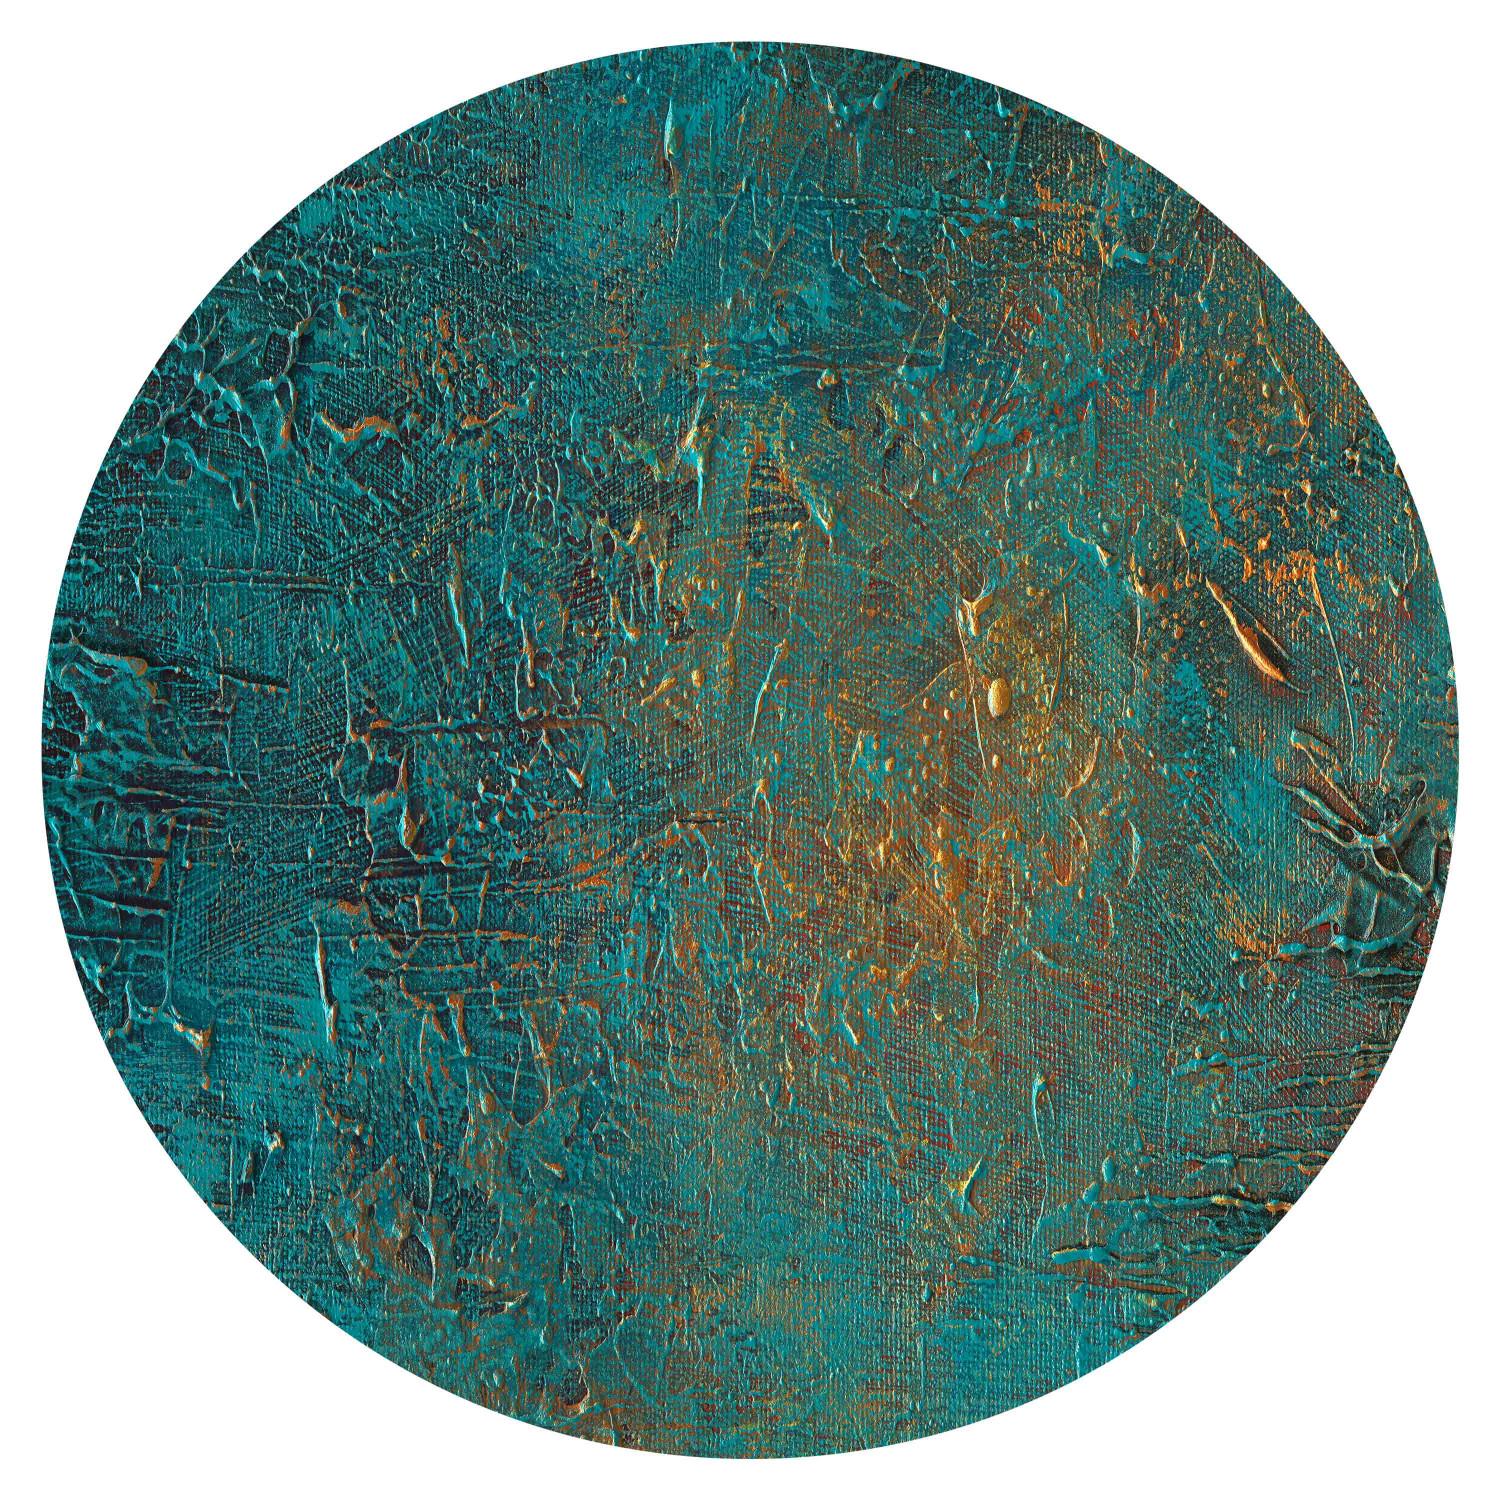 Fotomurales redondos Azure Mirror - Turquoise Abstraction With Visible Paint Structure